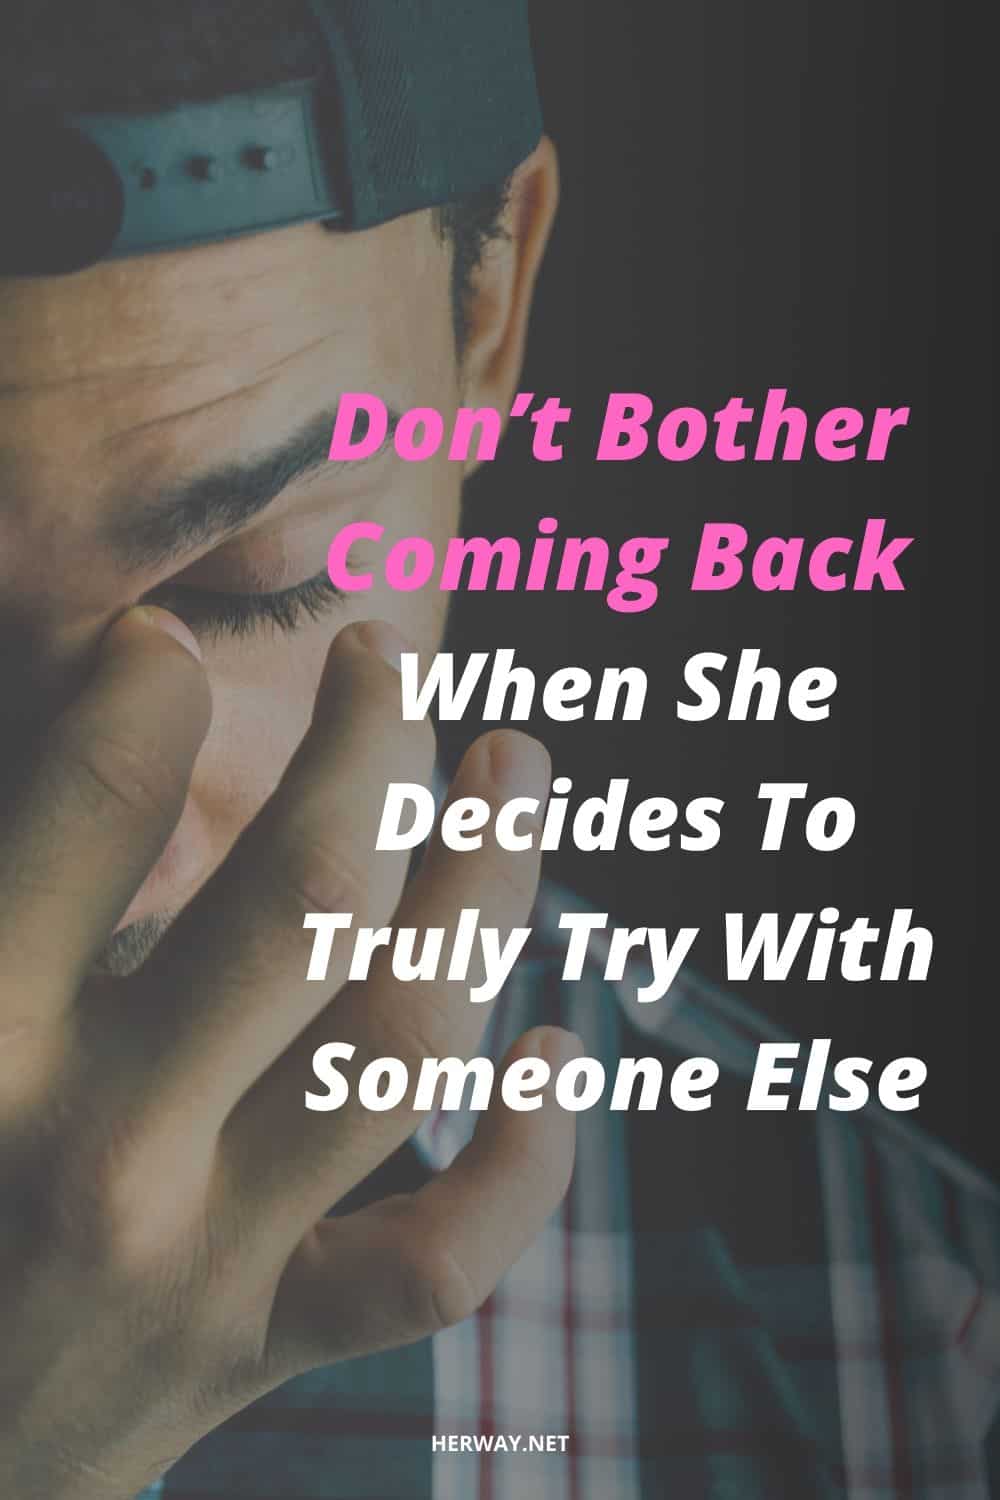 Don’t Bother Coming Back When She Decides To Truly Try With Someone Else